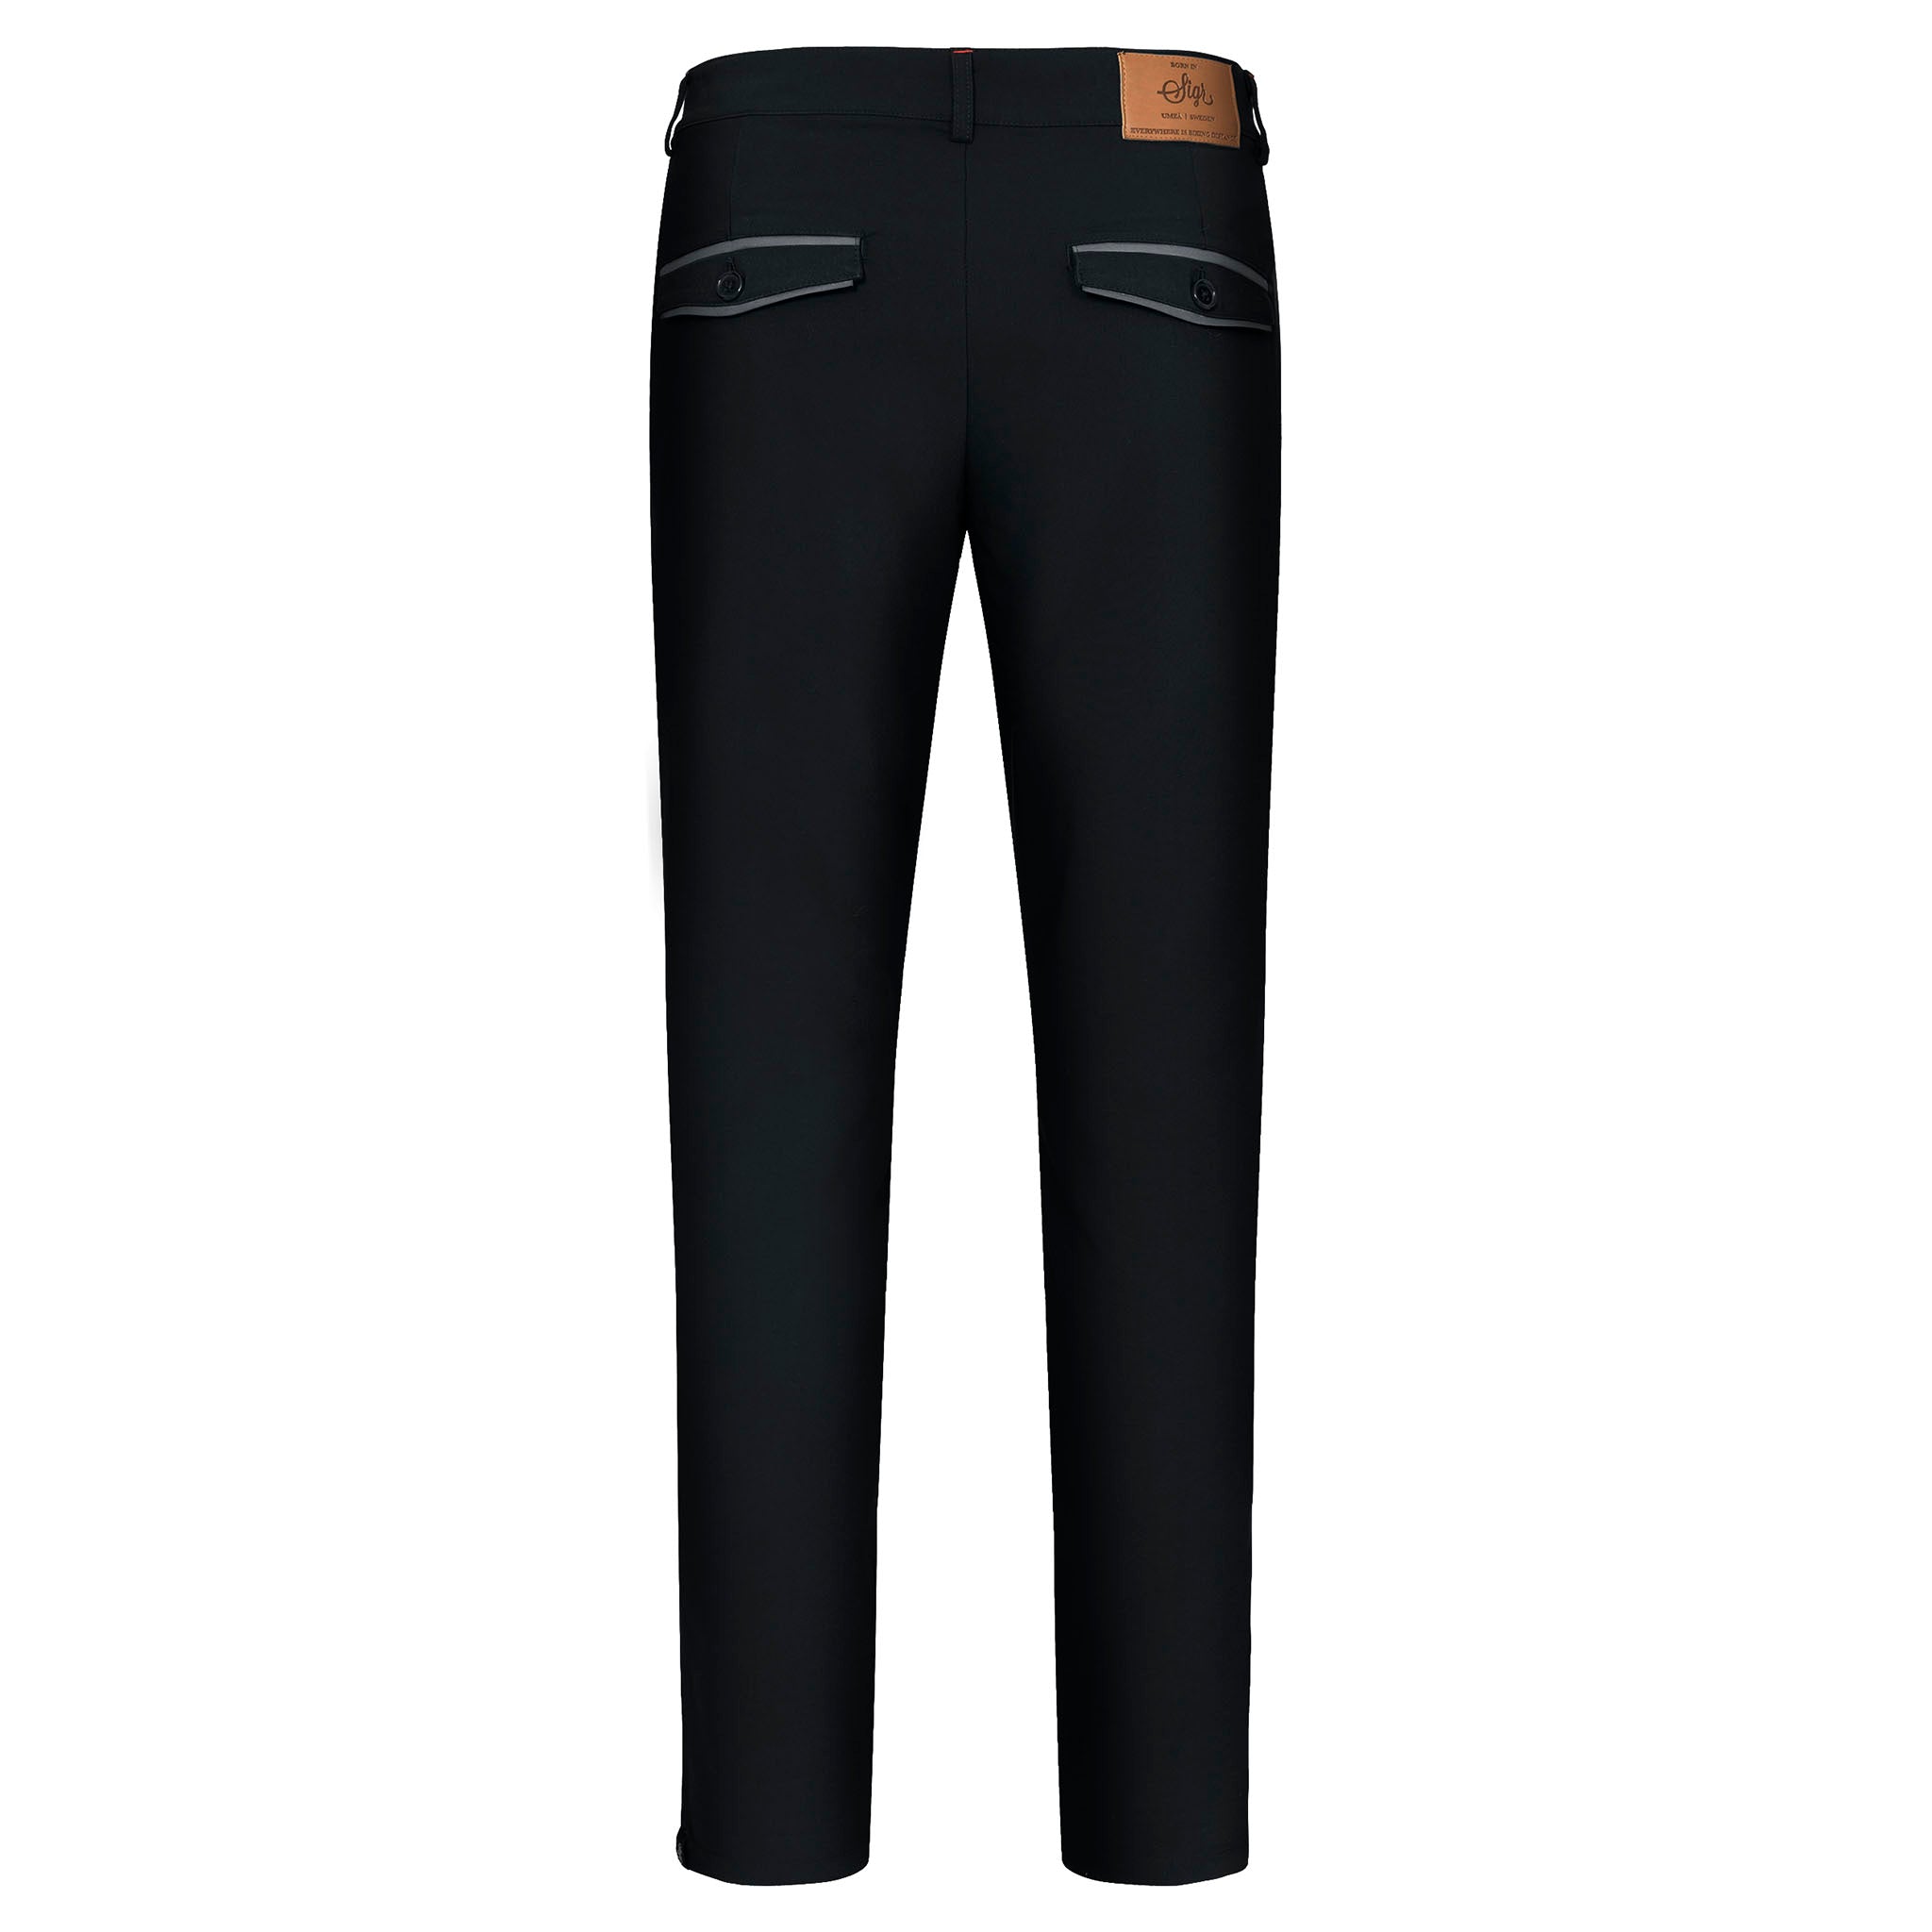 Riksvag 99 - Road Cycling Chinos in Black for Men